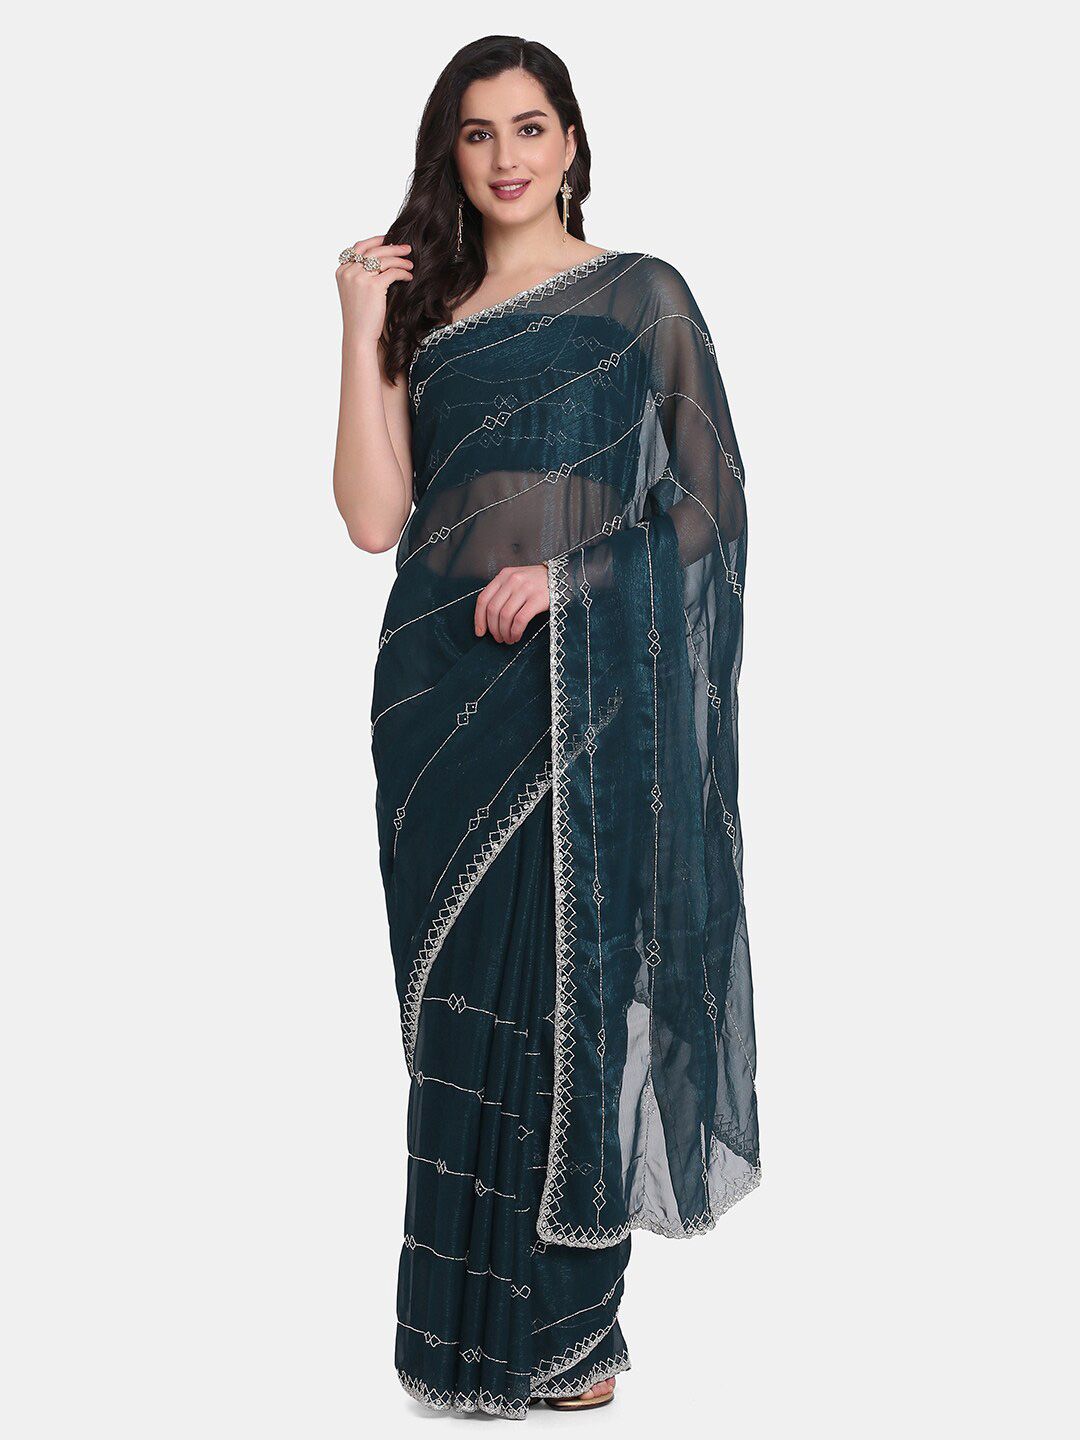 BOMBAY SELECTIONS Green & Silver-Toned Striped Beads and Stones Organza Saree Price in India